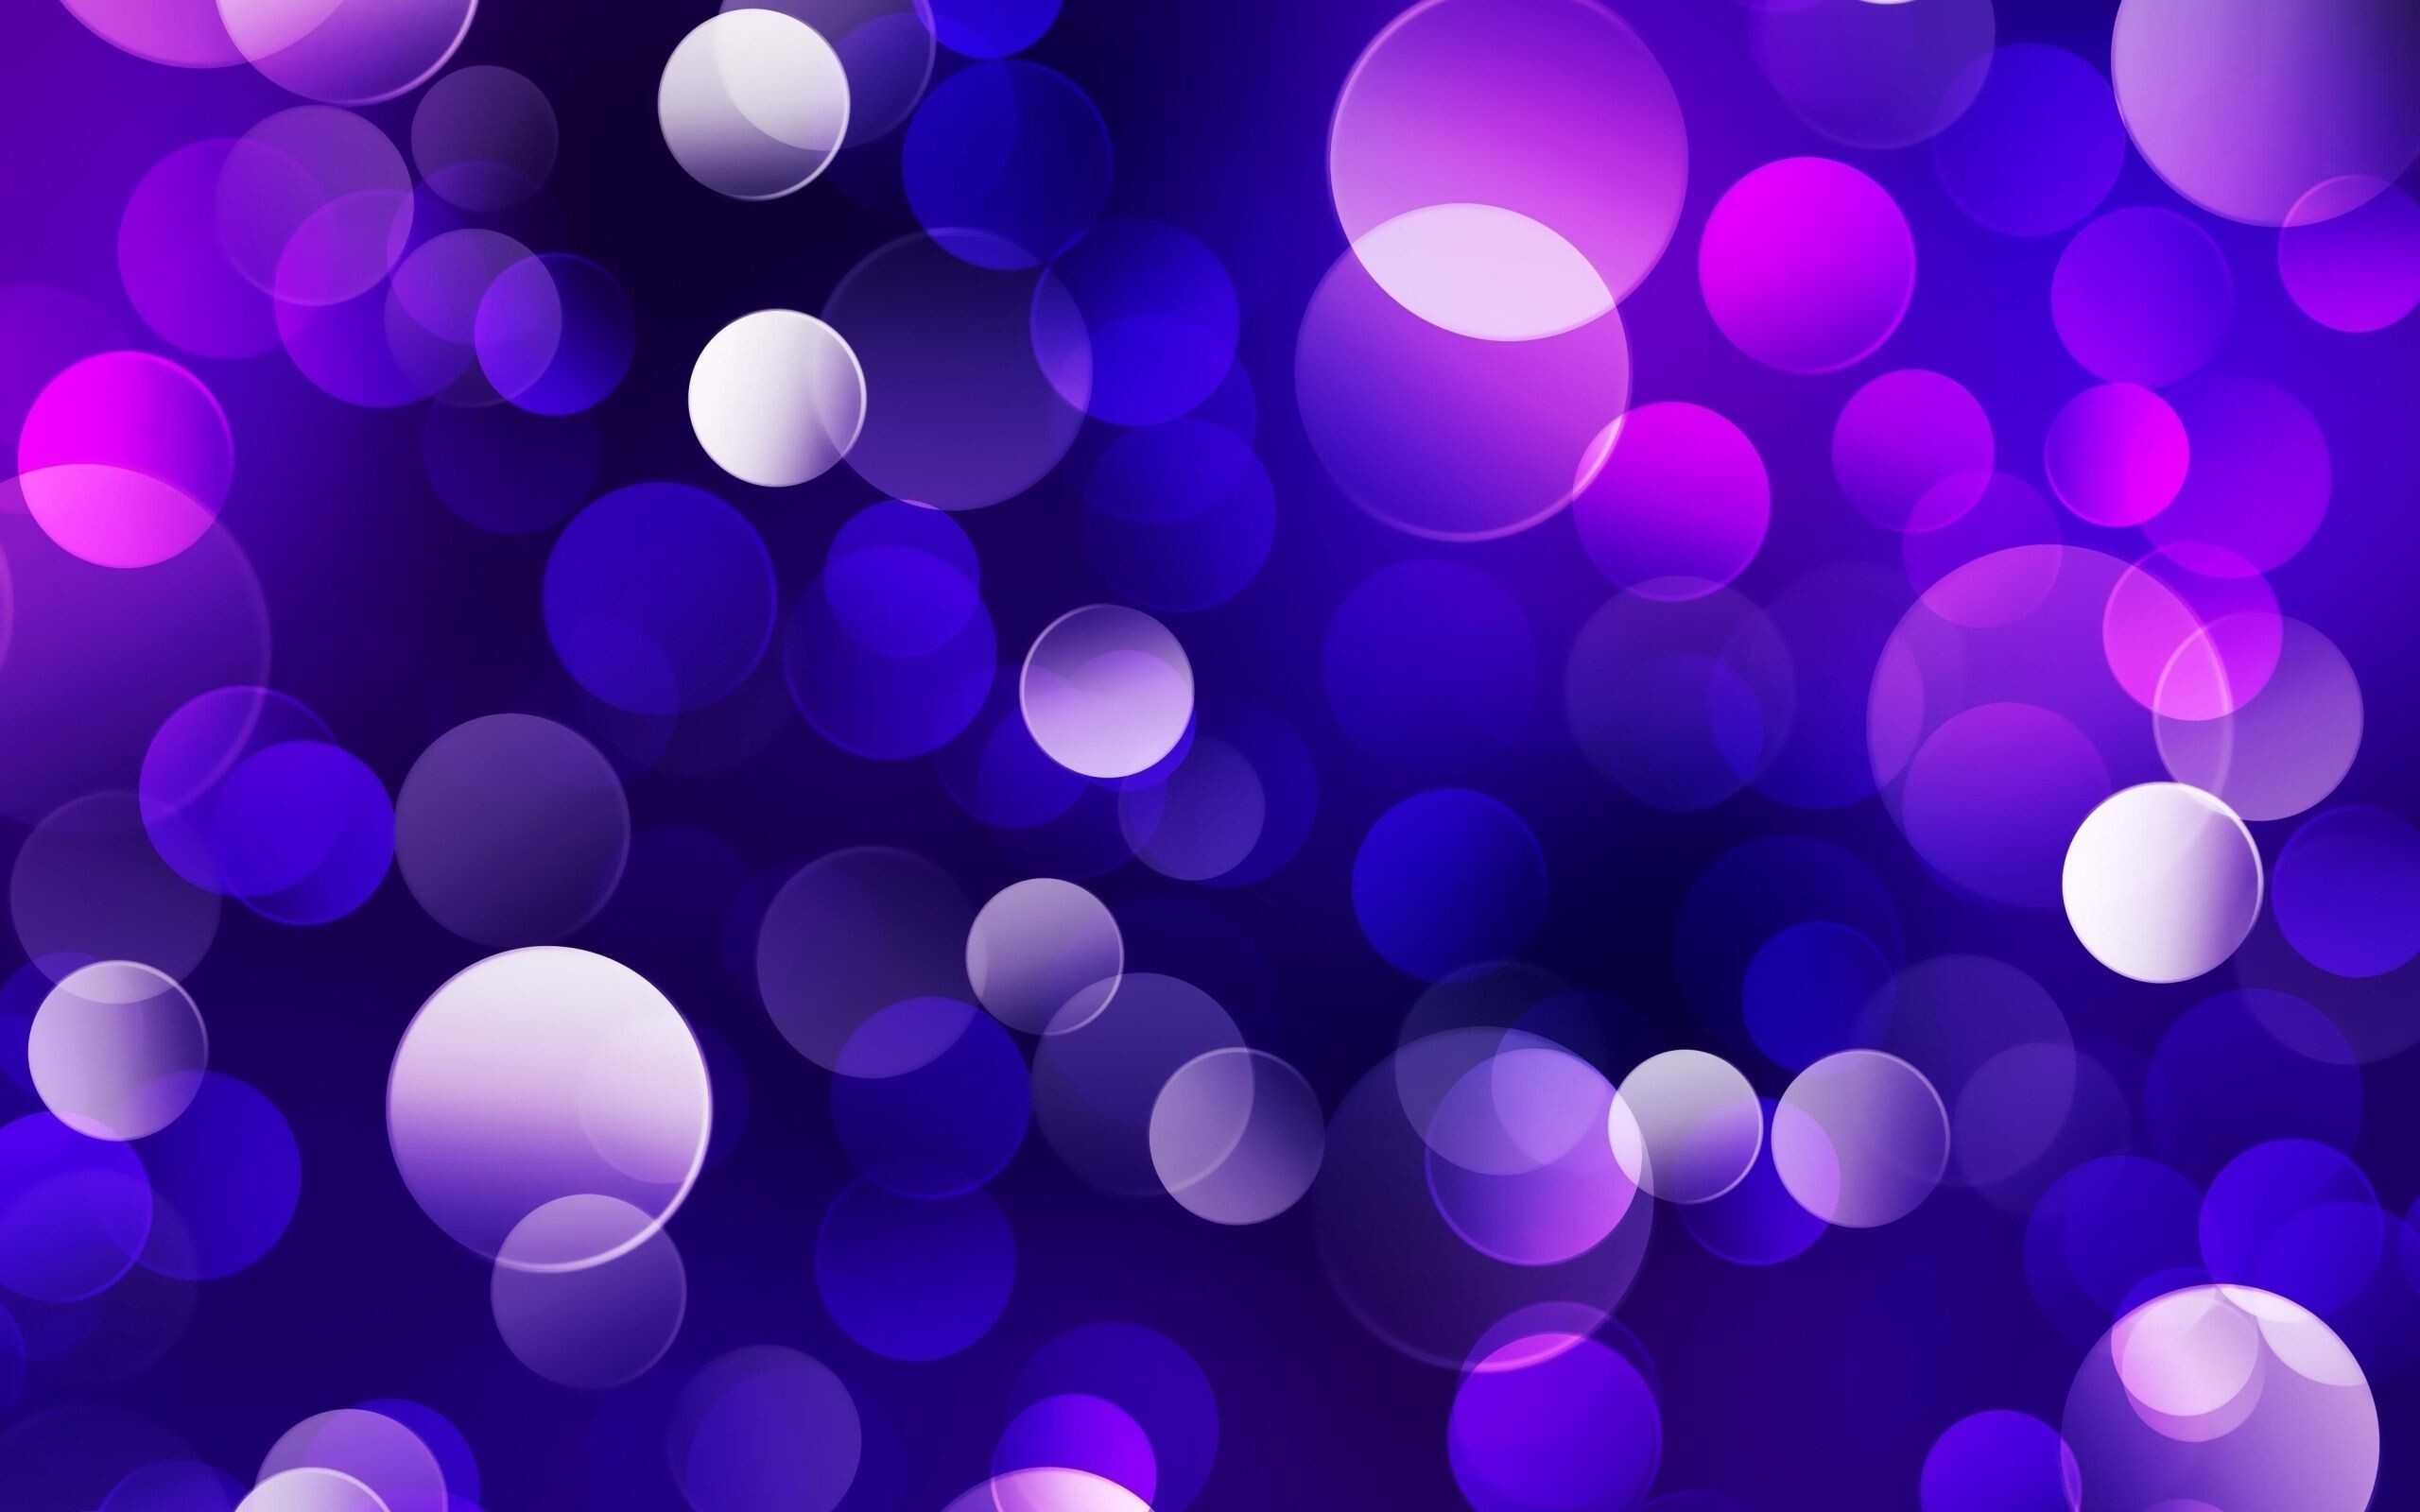 Girly: Abstract, Luminous balls, moon design, Glowing in the dark, Night effect. 2560x1600 HD Background.